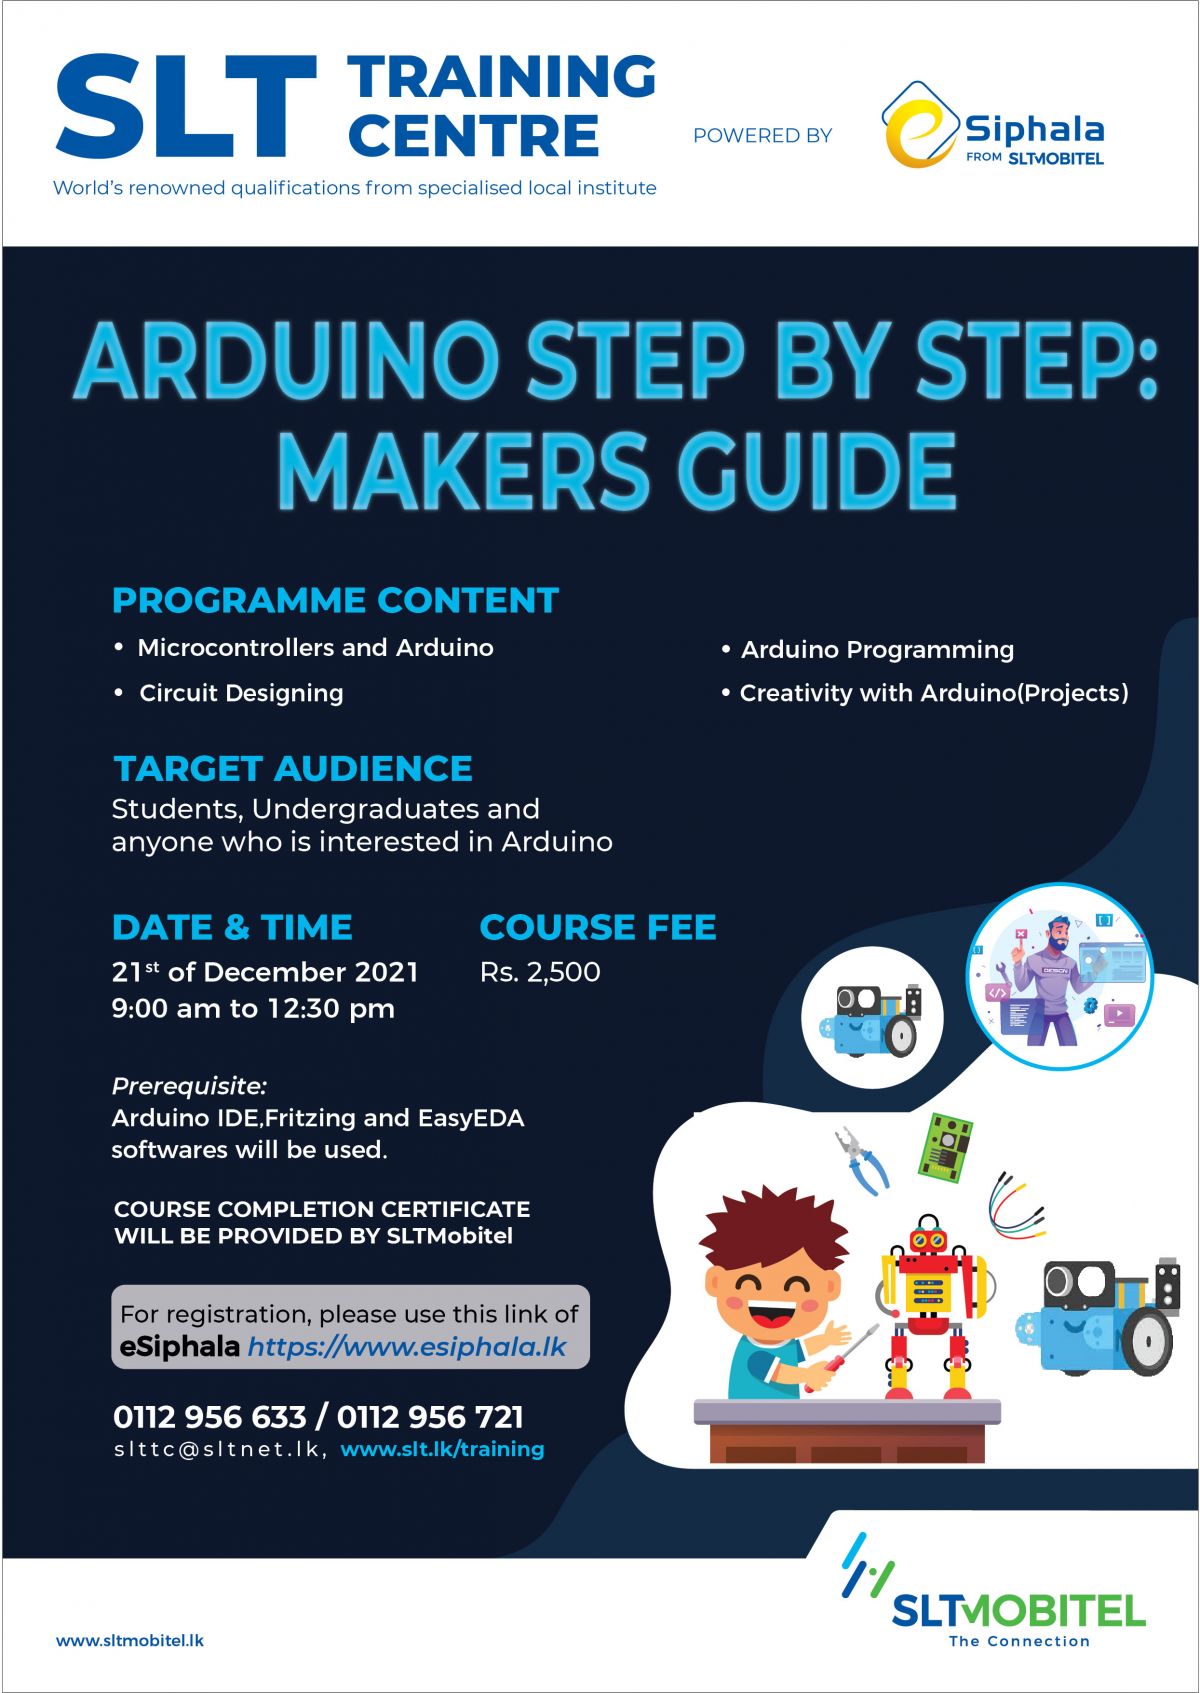 Arduino step by step: makers guide-December 2021